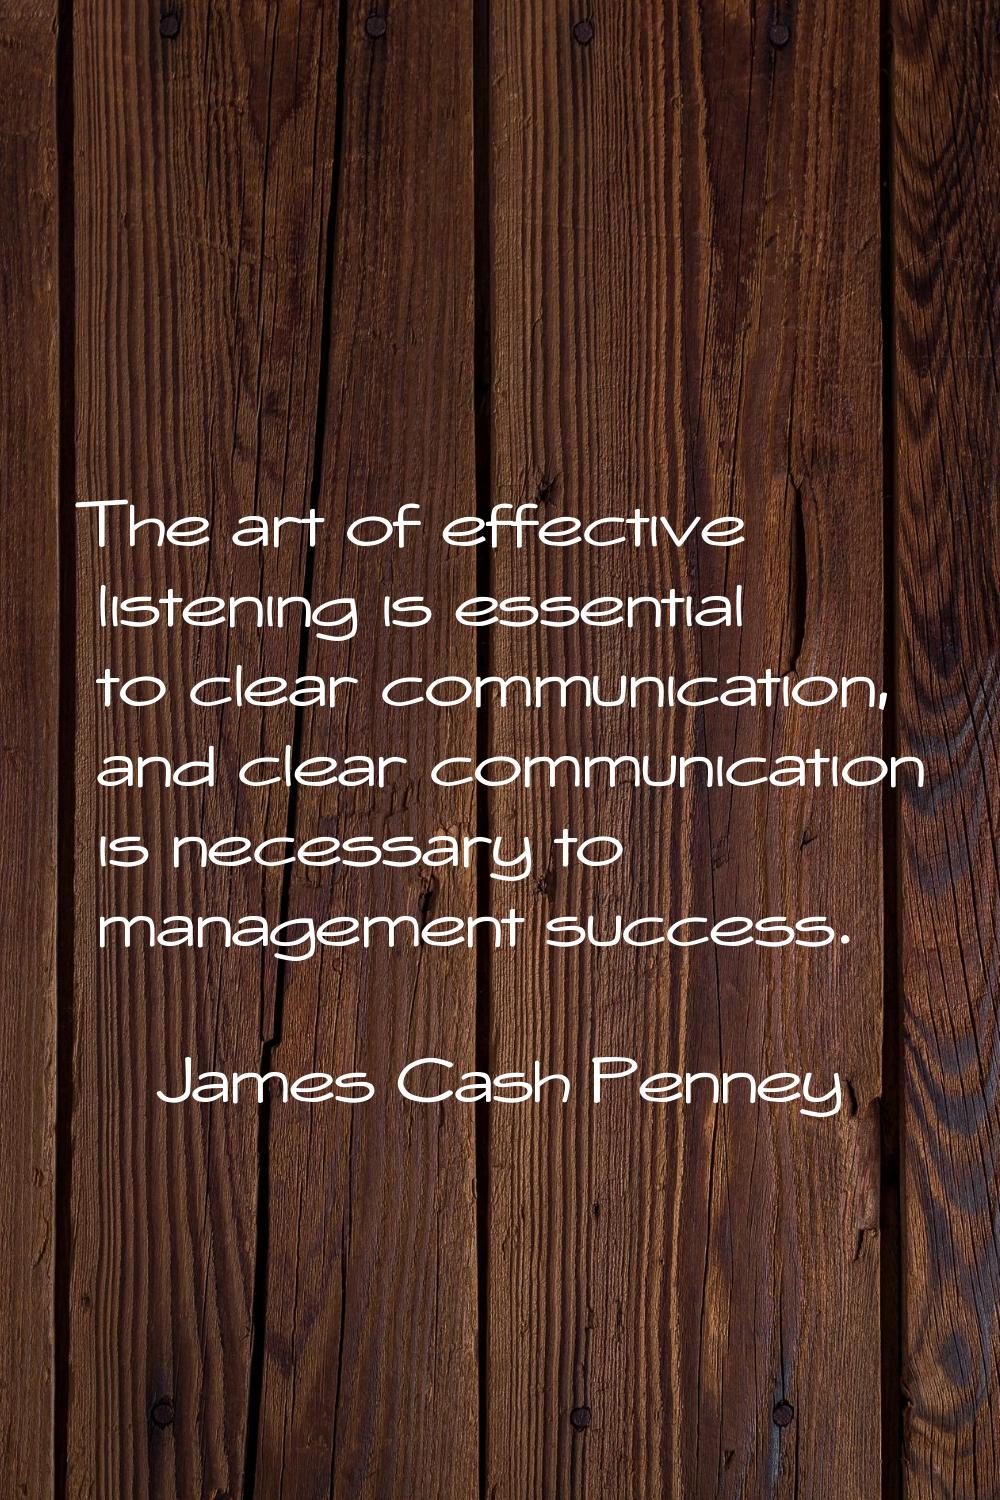 The art of effective listening is essential to clear communication, and clear communication is nece